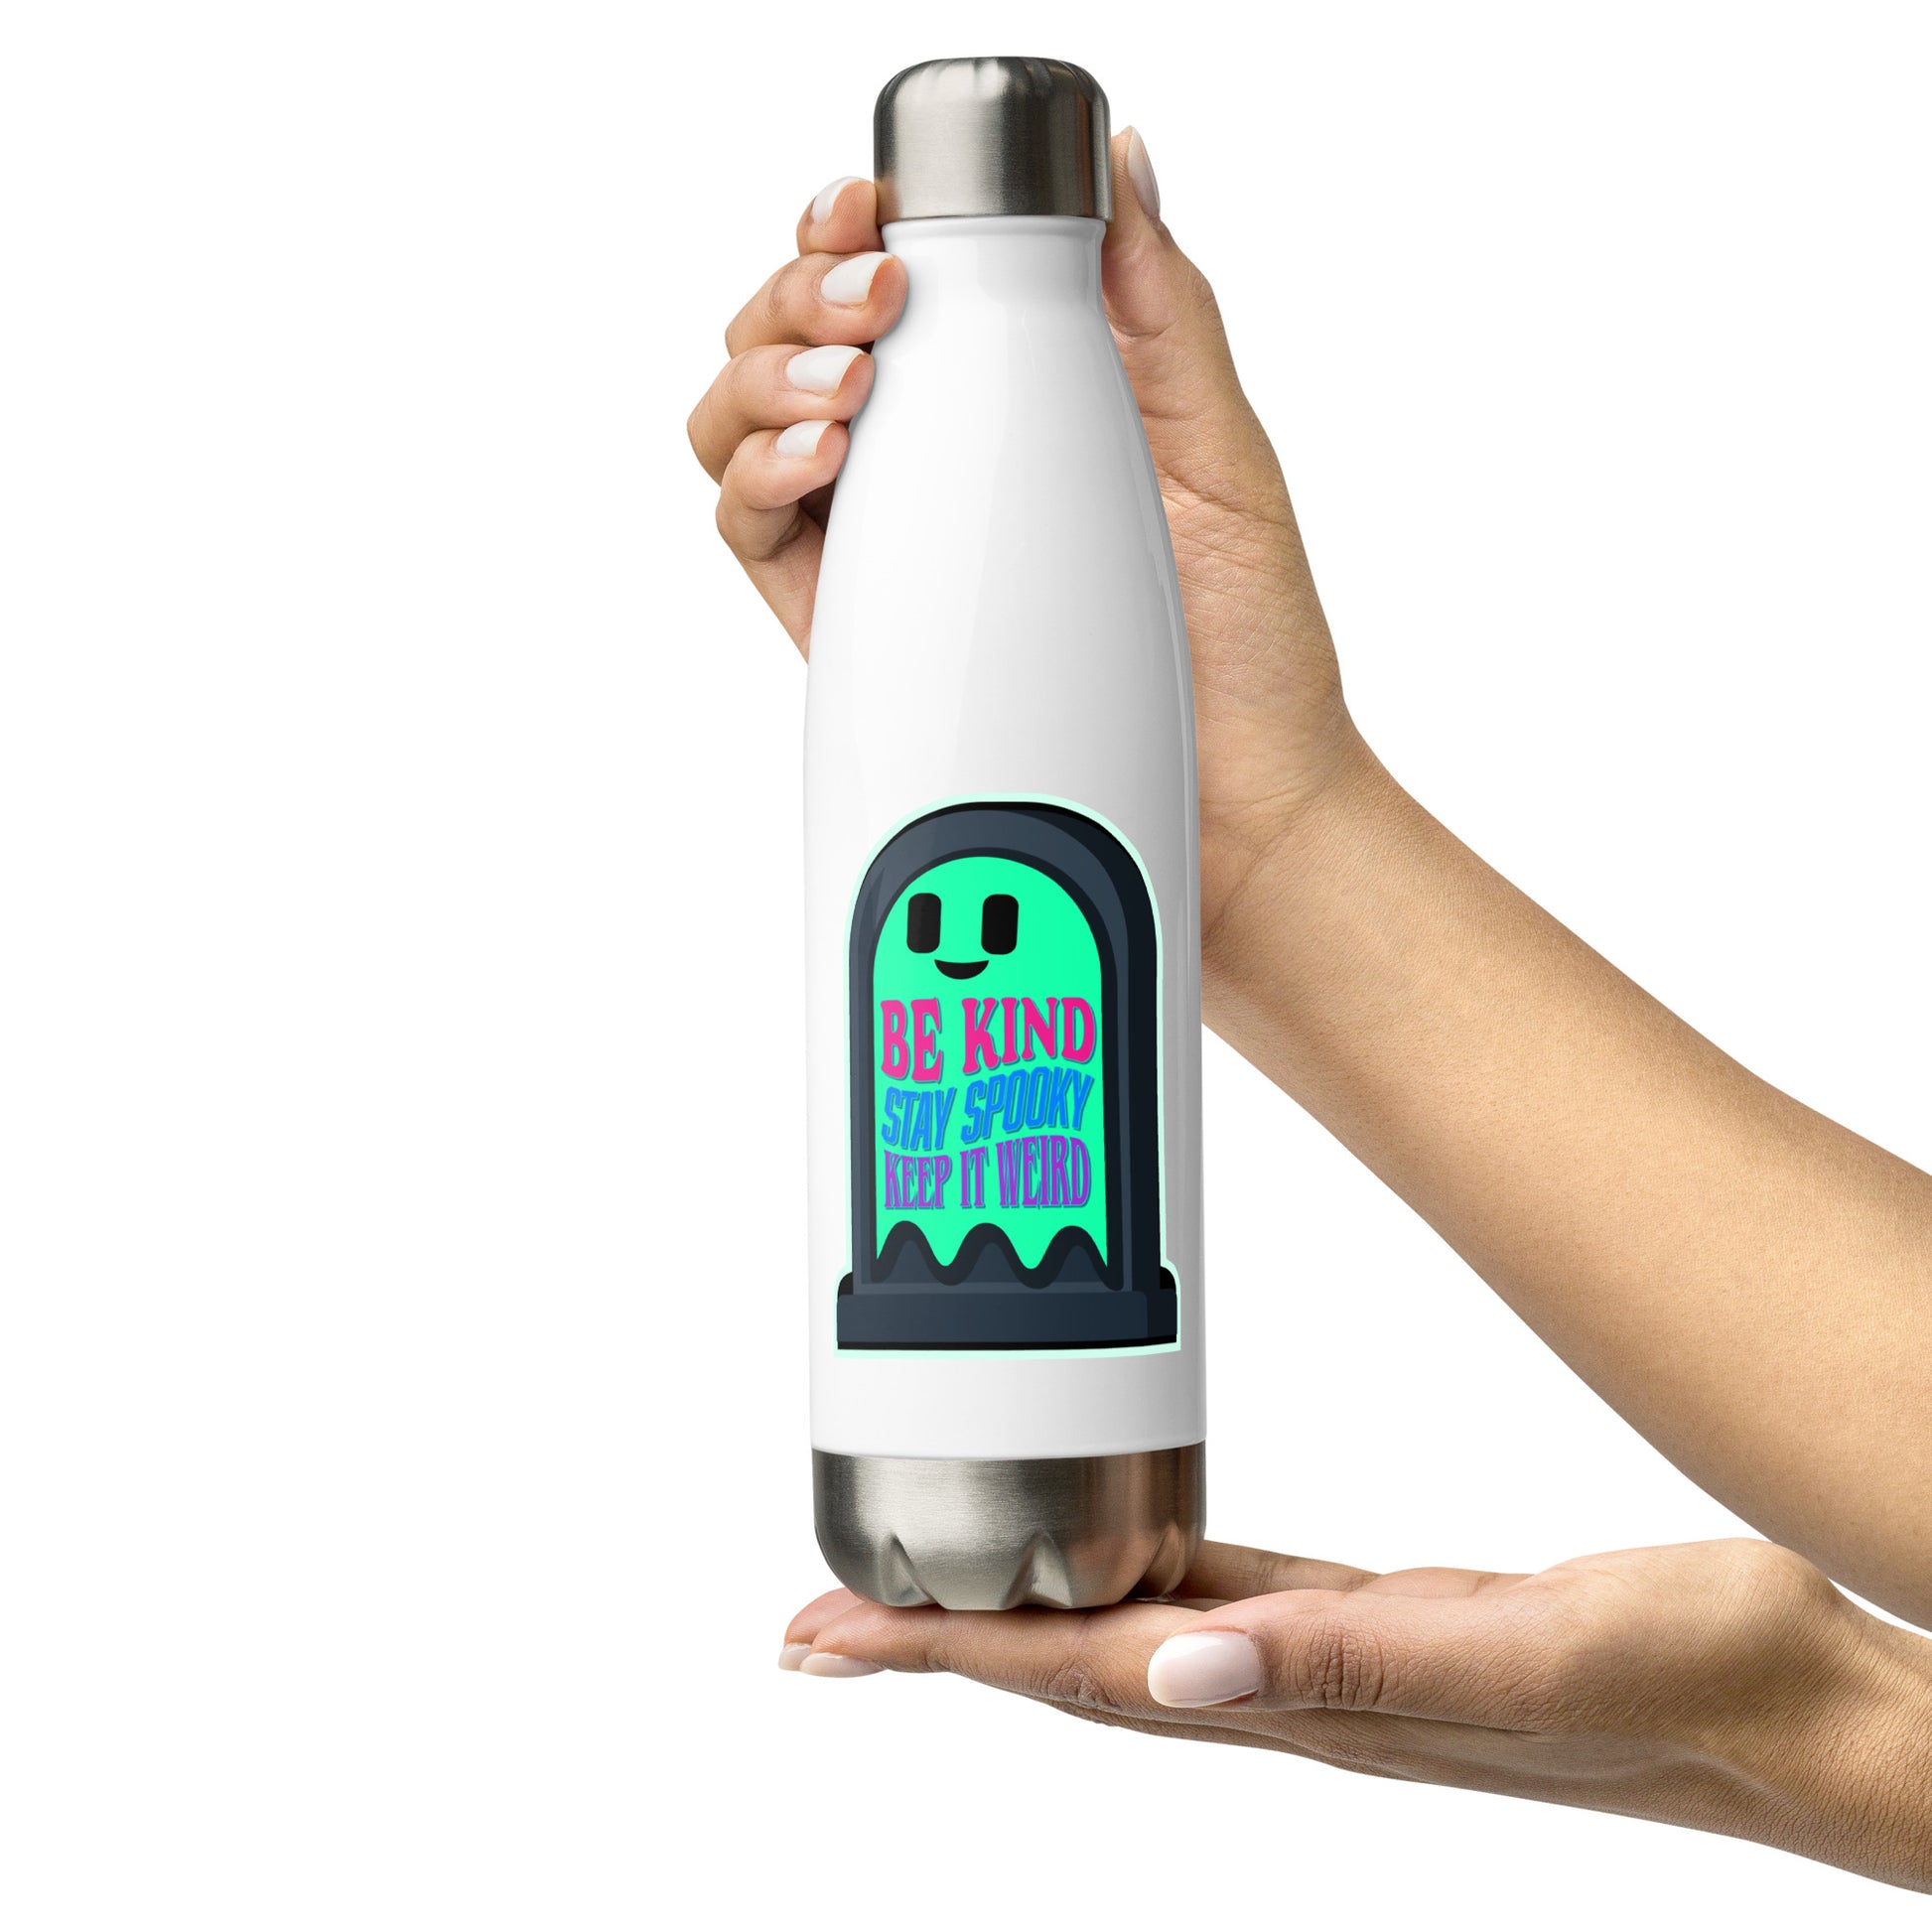 The Spooky Vegan: Product Review: Hydro Flask Insulated Stainless